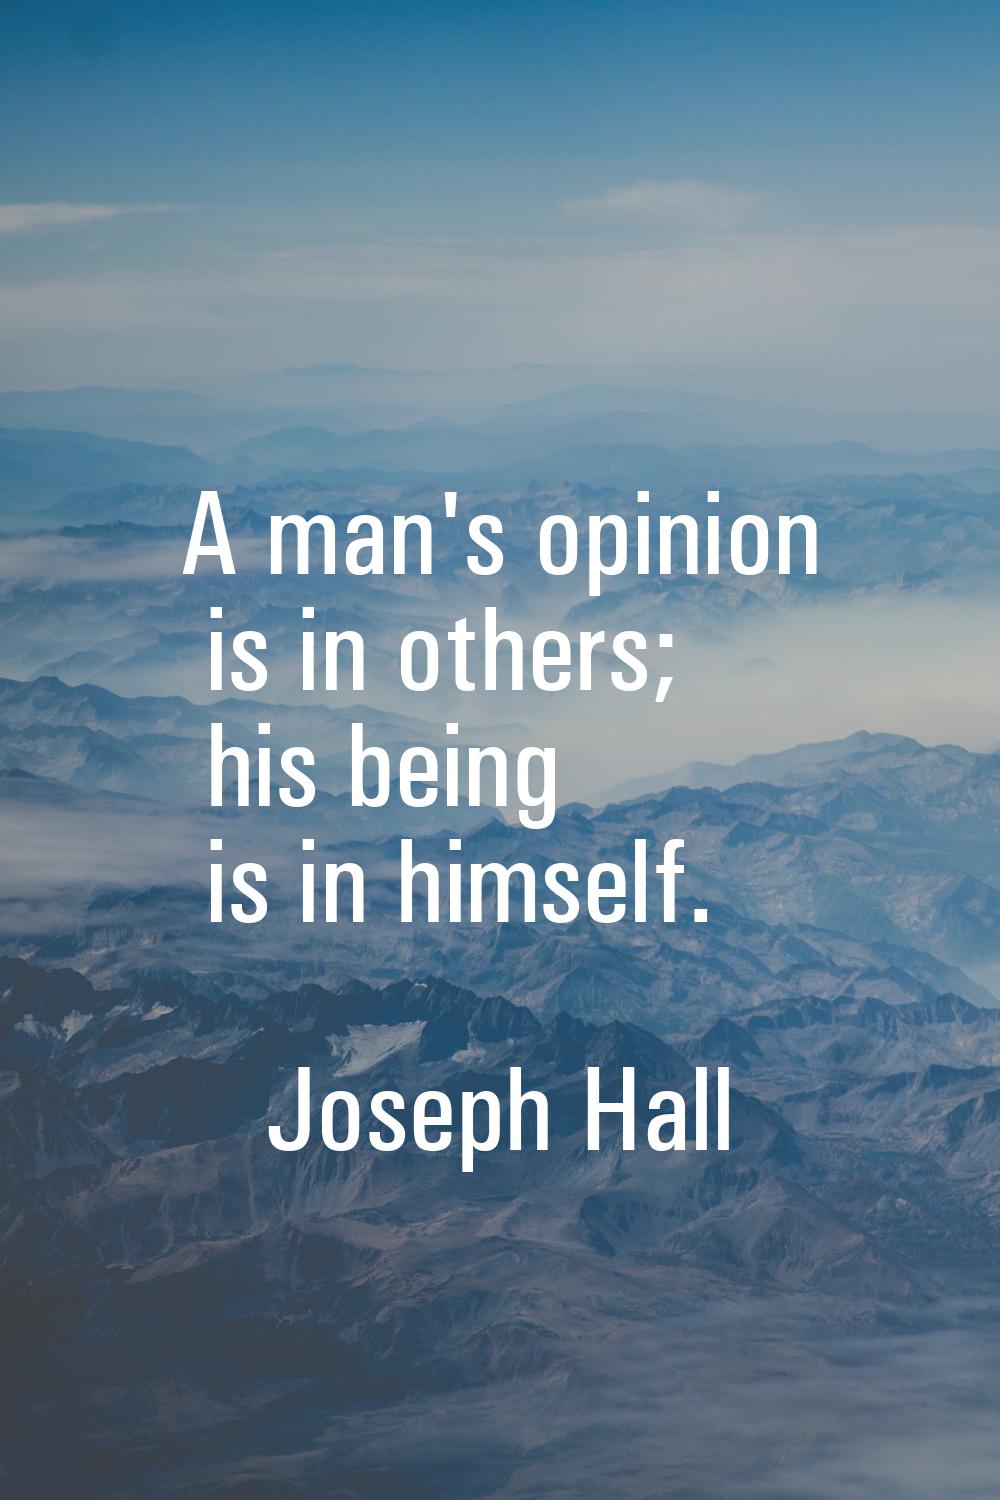 A man's opinion is in others; his being is in himself.